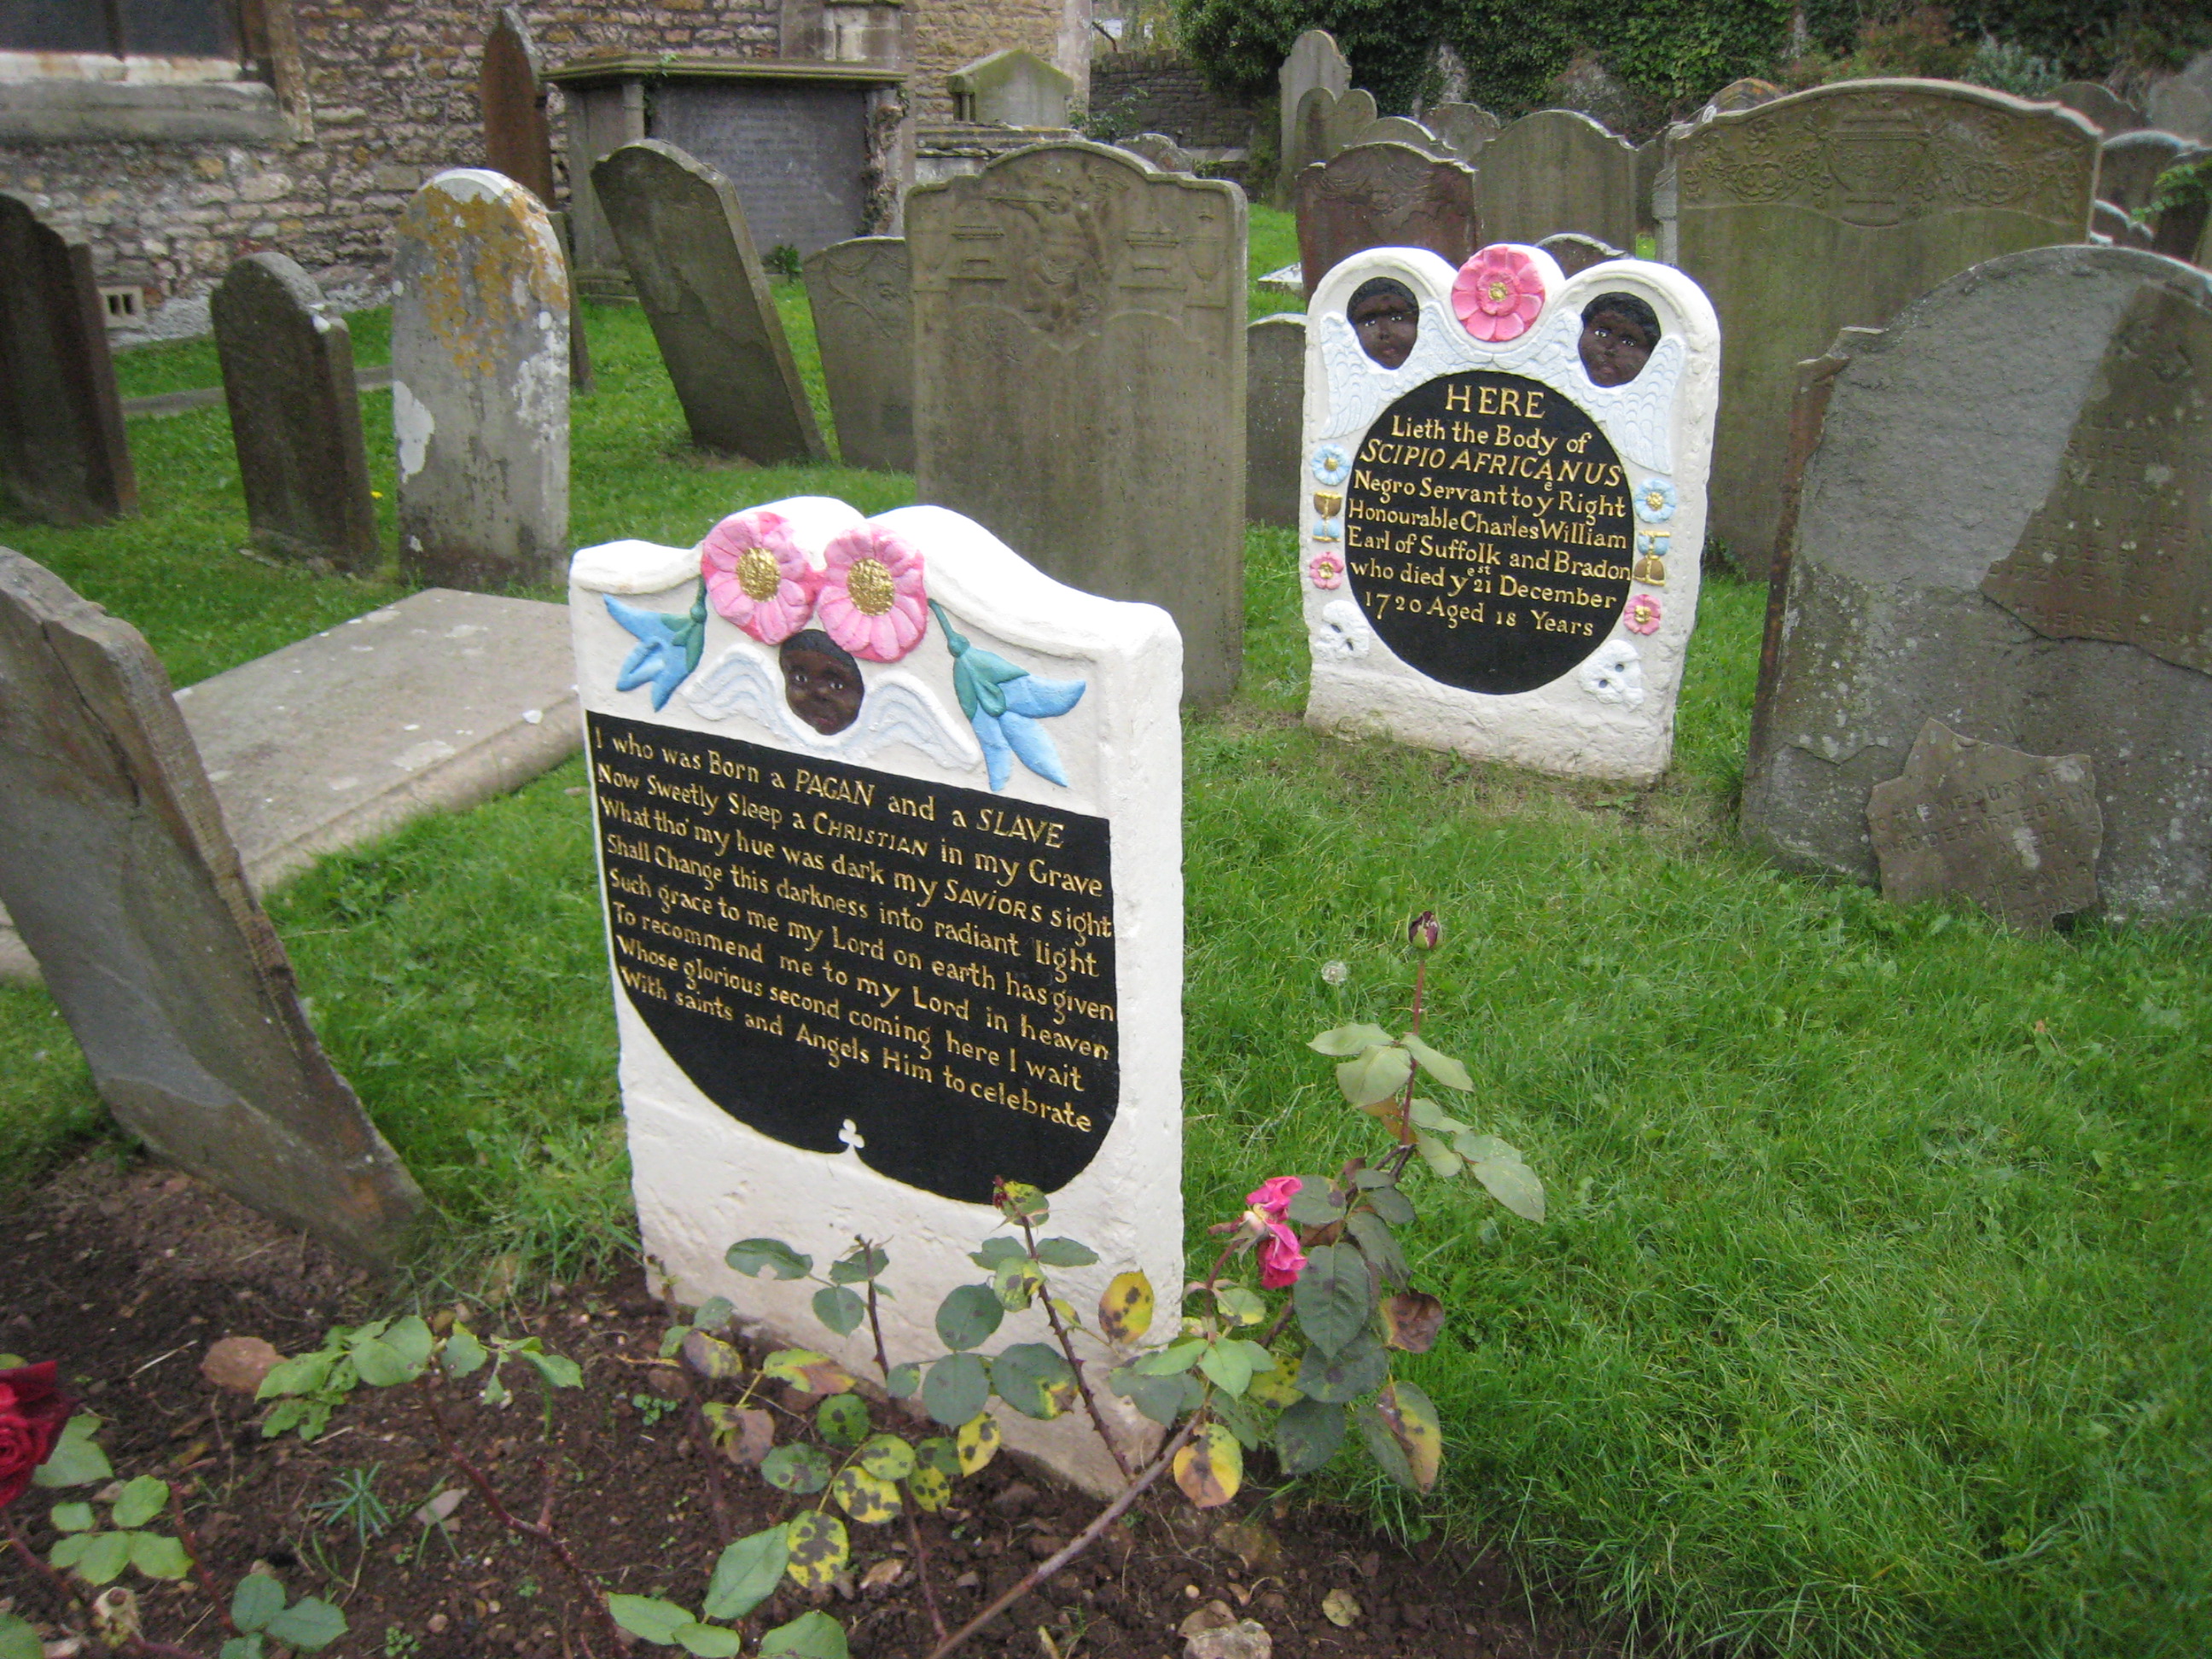 Headstone and footstone, with shaped tops. The freshly painted memorial stands out amongst unpainted stones. Carving includes winged Black cherubs, and flowers. The headstone carries the details of the subject’s life; the footstone carries a verse.